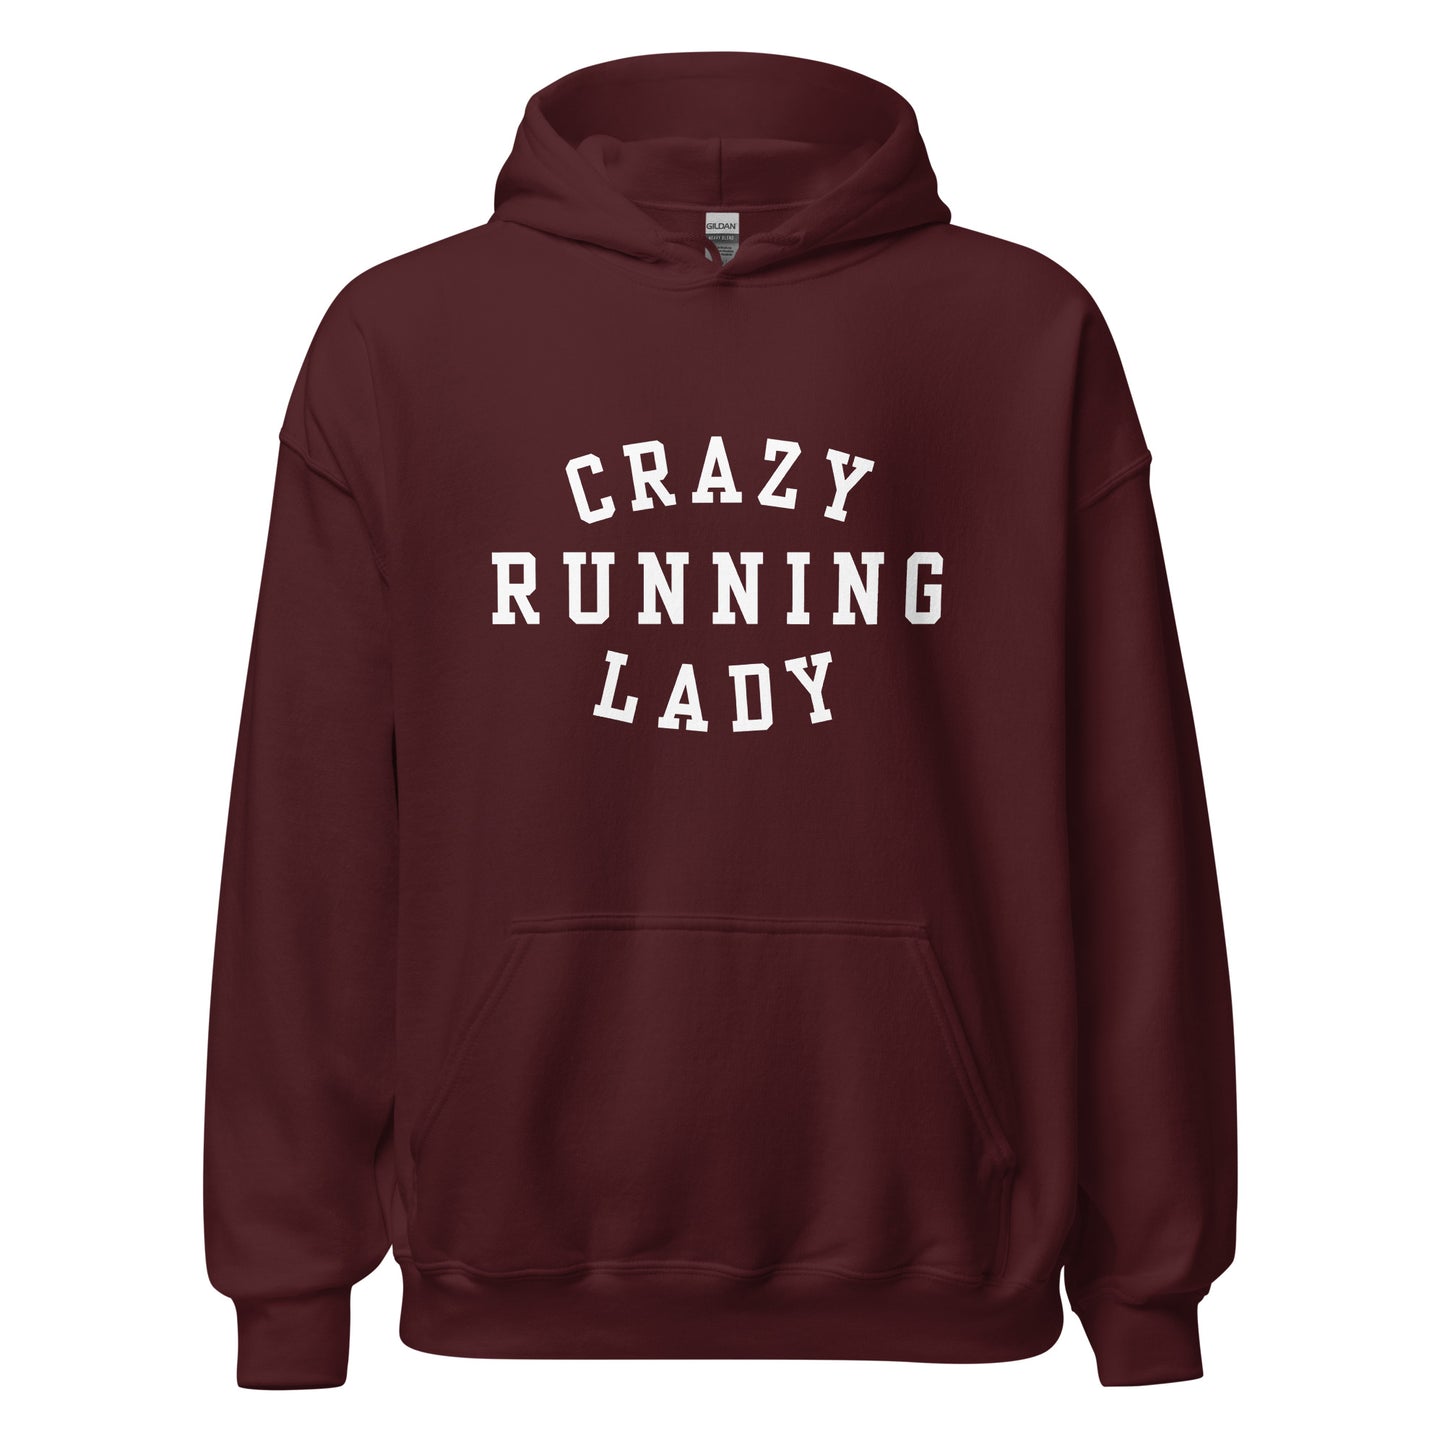 Crazy Running Lady Hoodie - White Font